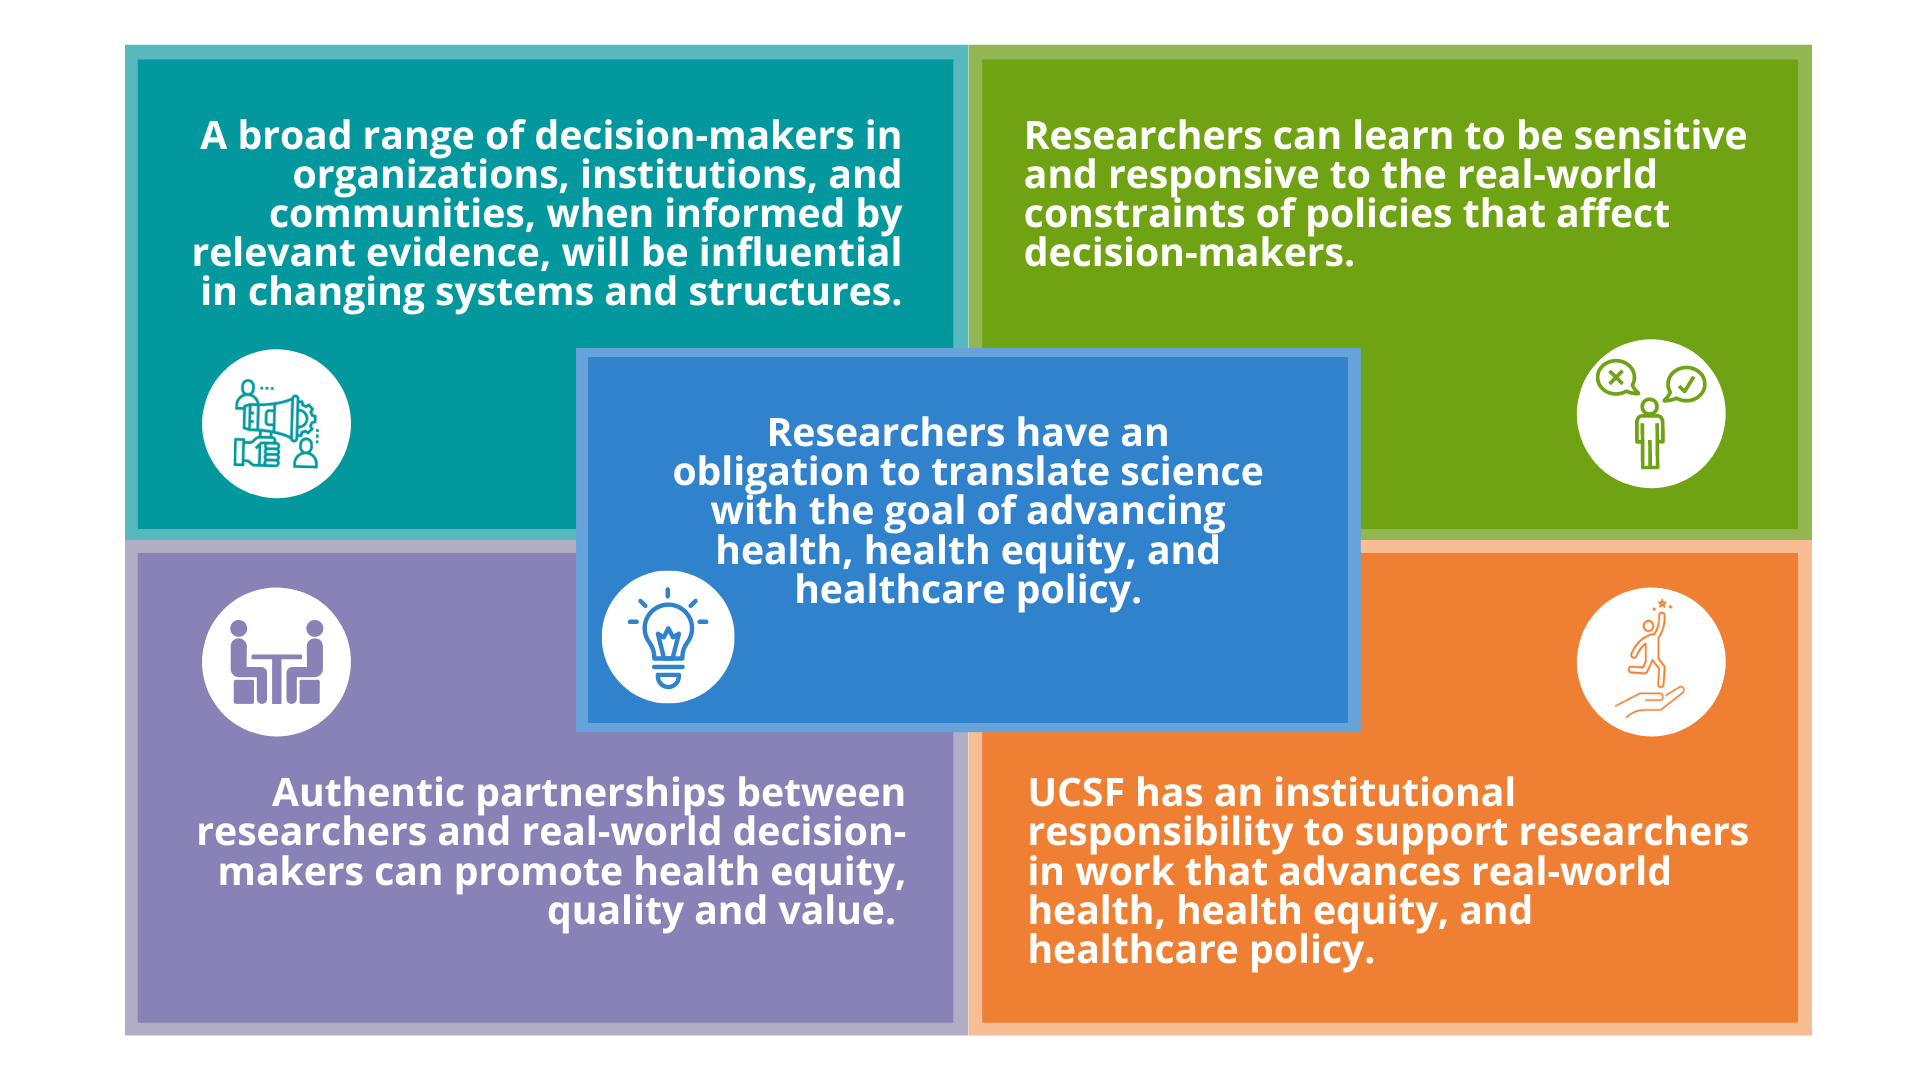 A rectangle divided into four rectangles with a rectangle in the middle listing the guiding principles for an IMPACT-oriented scientist . Each rectangle is a different color (turquoise, green, purple, orange, and blue) and has text stating one guiding principle with an icon that matches. The guiding principles are: 1. A broad range of decision-makers in organizations, institutions, and communities when informed by relevant evidence, will be influential in changing systems and structures; 2. Researchers can learn to be sensitive and responsive to the real-world constraints of policies that affect decision-makers; 3. Authentic partnerships between researchers and real-world decision makers can promote health equity and value; 4. UCSF has an institutional responsibility to support researchers in work that advances real-world health, health equity, and healthcare policy; 5. Researchers have an obligation to translate science with the goal of advancing health, health equity, and healthcare policy.